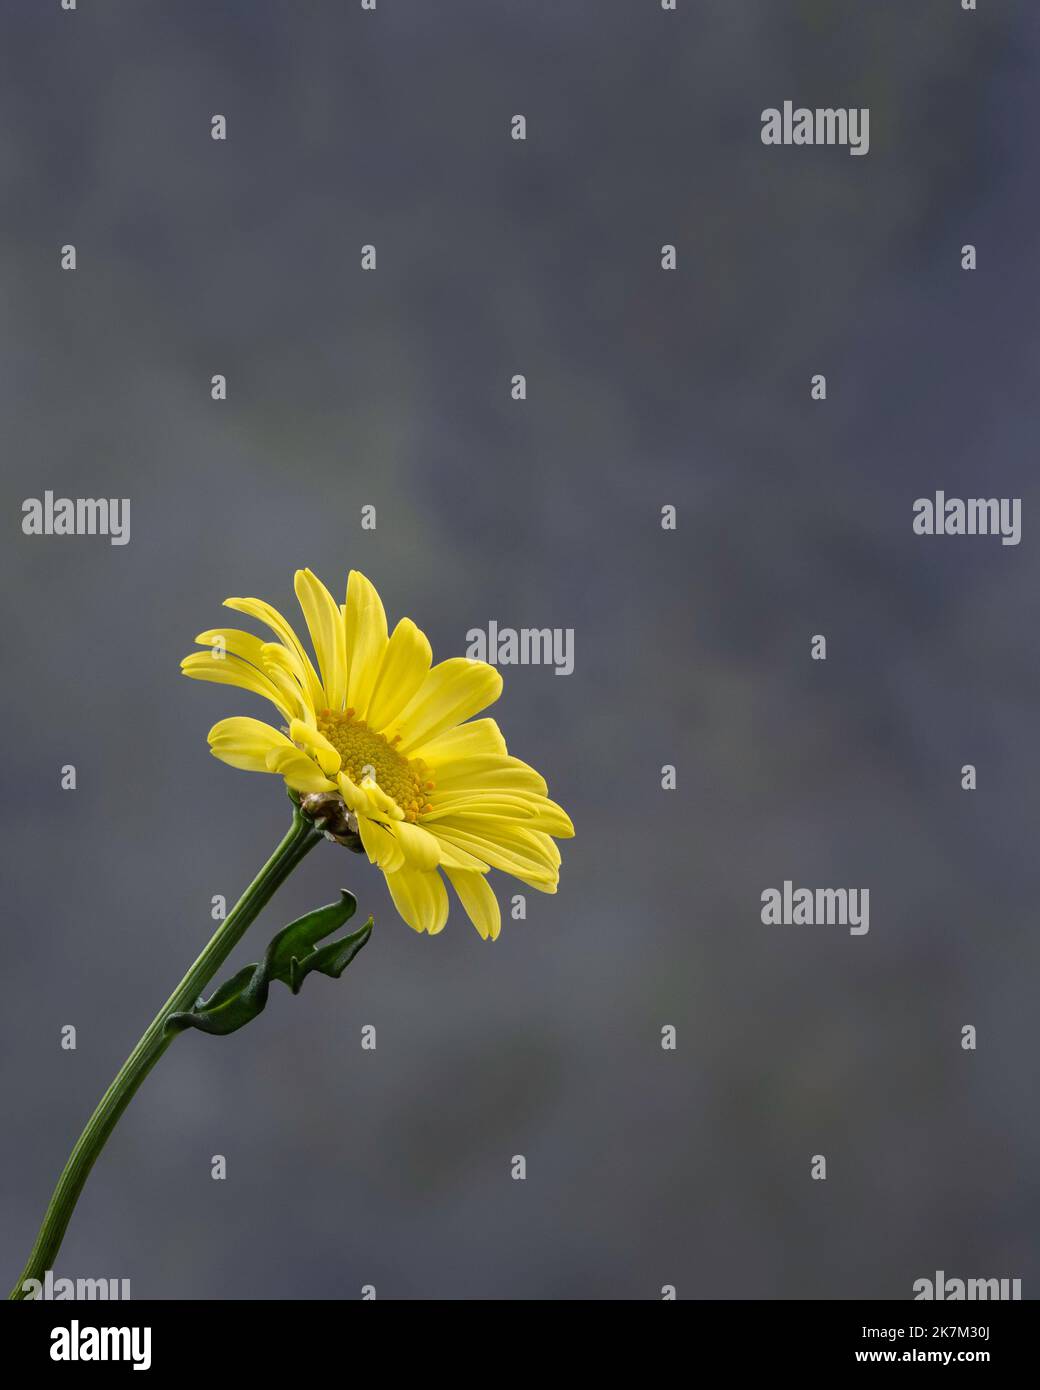 A bright yellow flower on textured background. Vertical format. Stock Photo